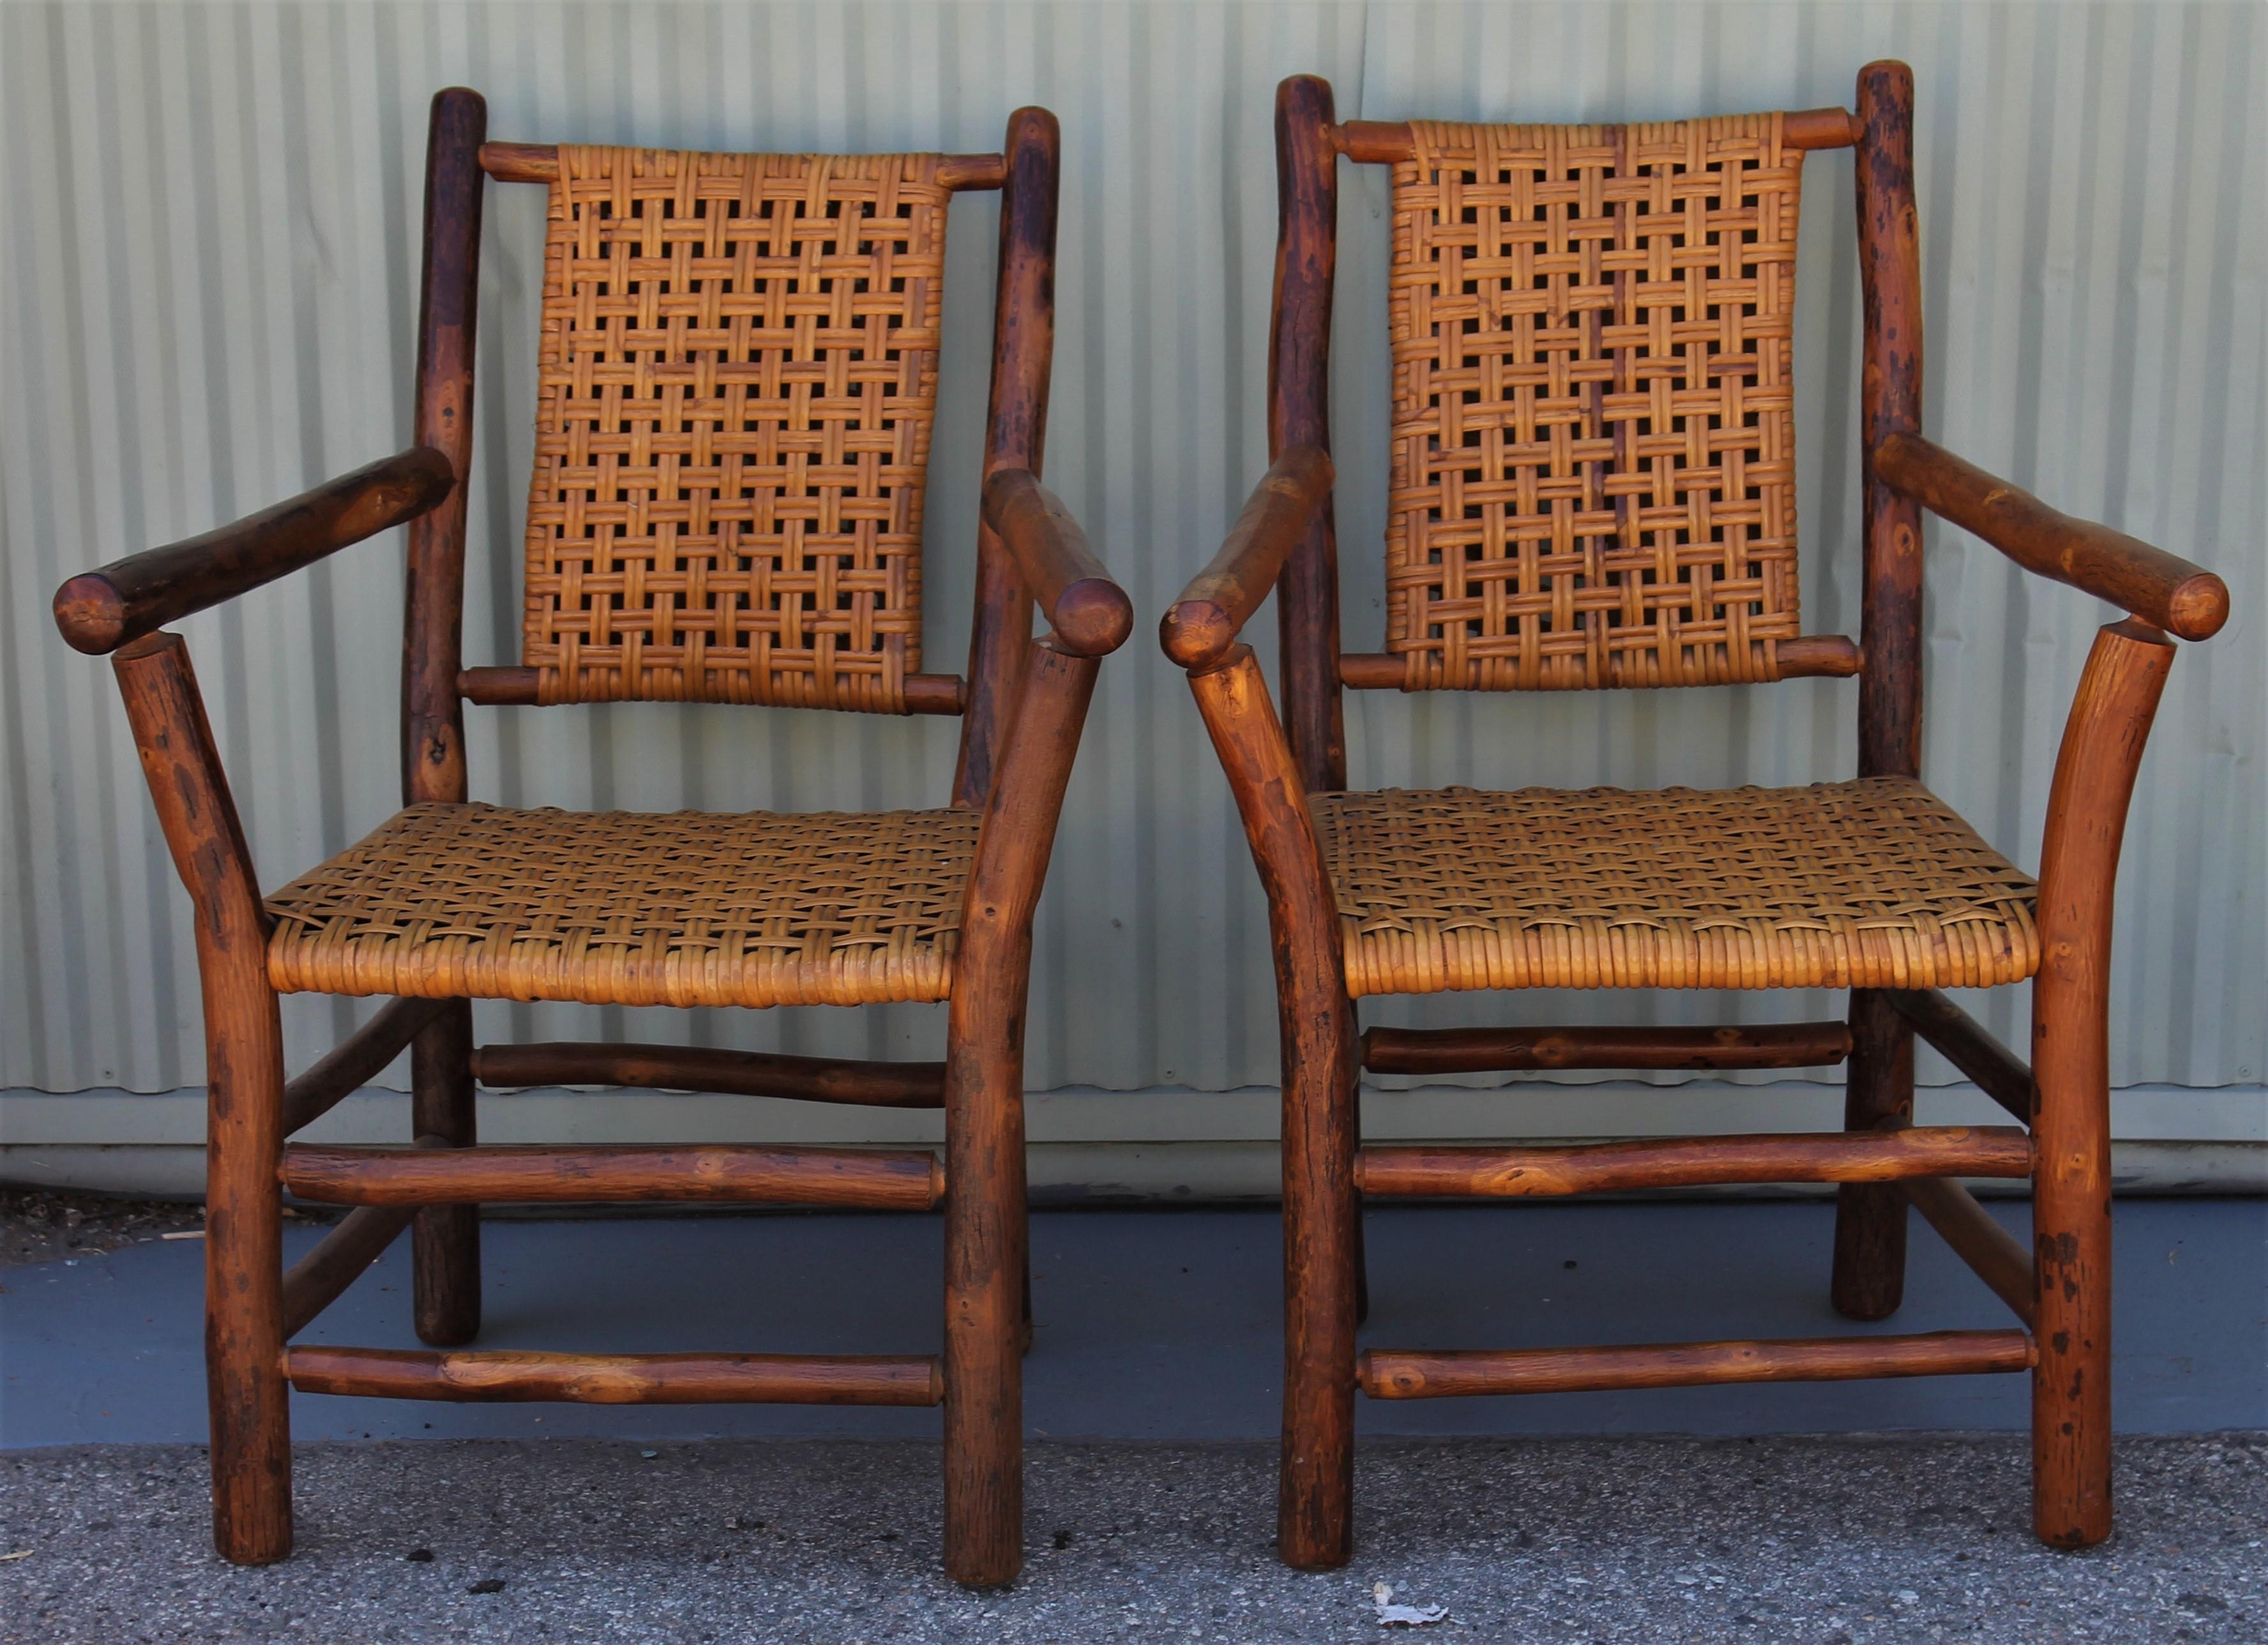 This pair of old hickory from Martinsville, Indiana side chairs are in pristine condition and have all original cane seats and backing. The chairs have the original old natural surface.